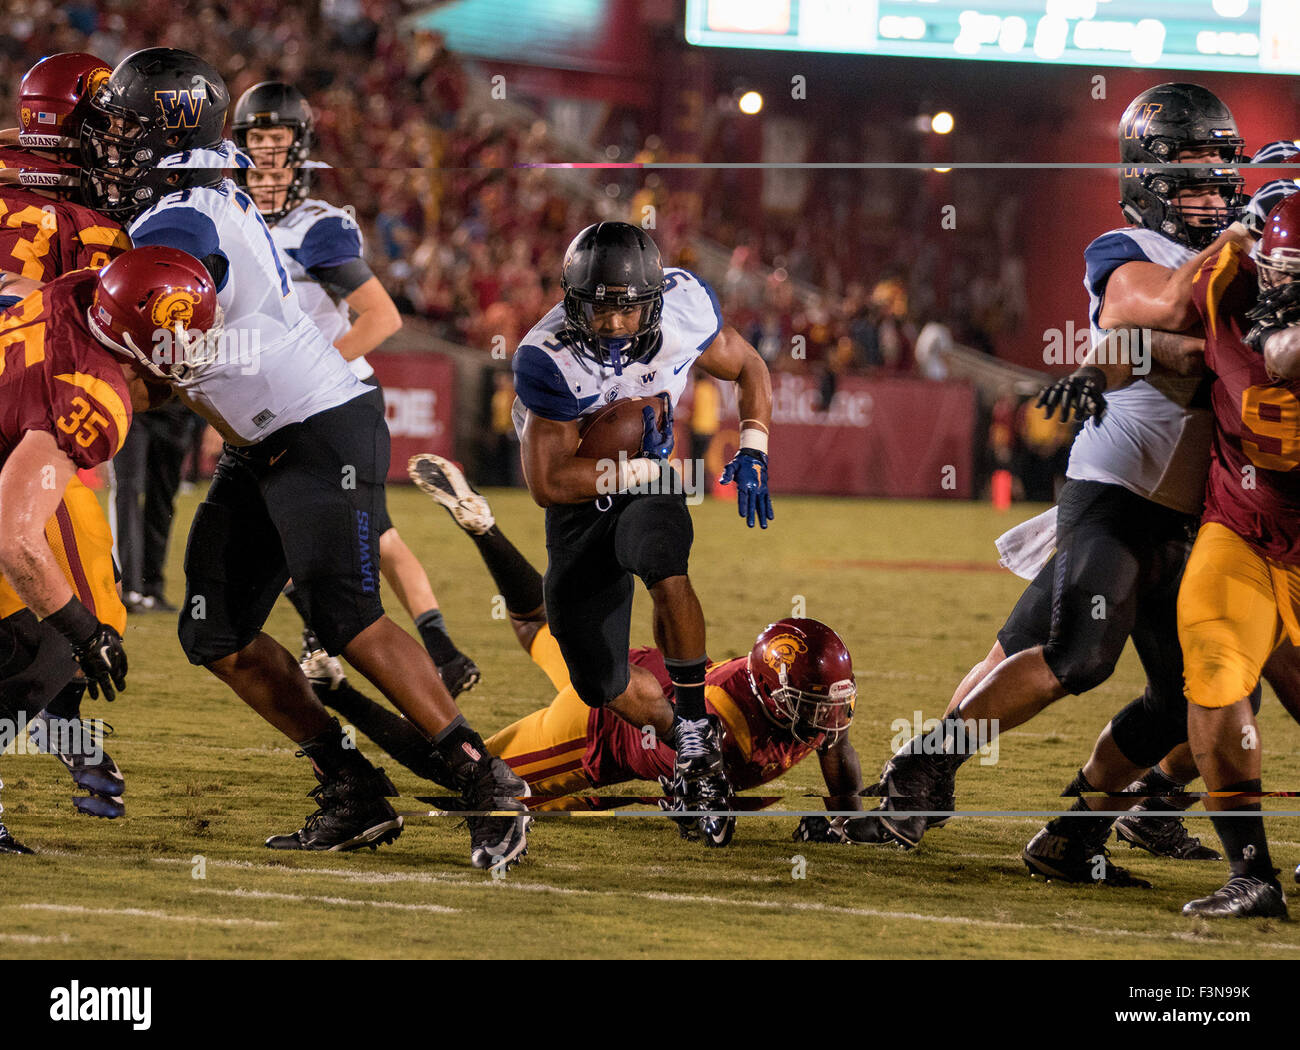 Los Angeles, CA, USA. 08th Oct, 2015. Washington Huskies running back (9) Myles Gaskin looks for running room during a game between the Washington Huskies and the USC Trojans at the Los Angeles Memorial Coliseum in Los Angeles, California. USC was defeated the Washington 17-12.(Mandatory Credit: Juan Lainez/MarinMedia/Cal Sport Media) © csm/Alamy Live News Stock Photo